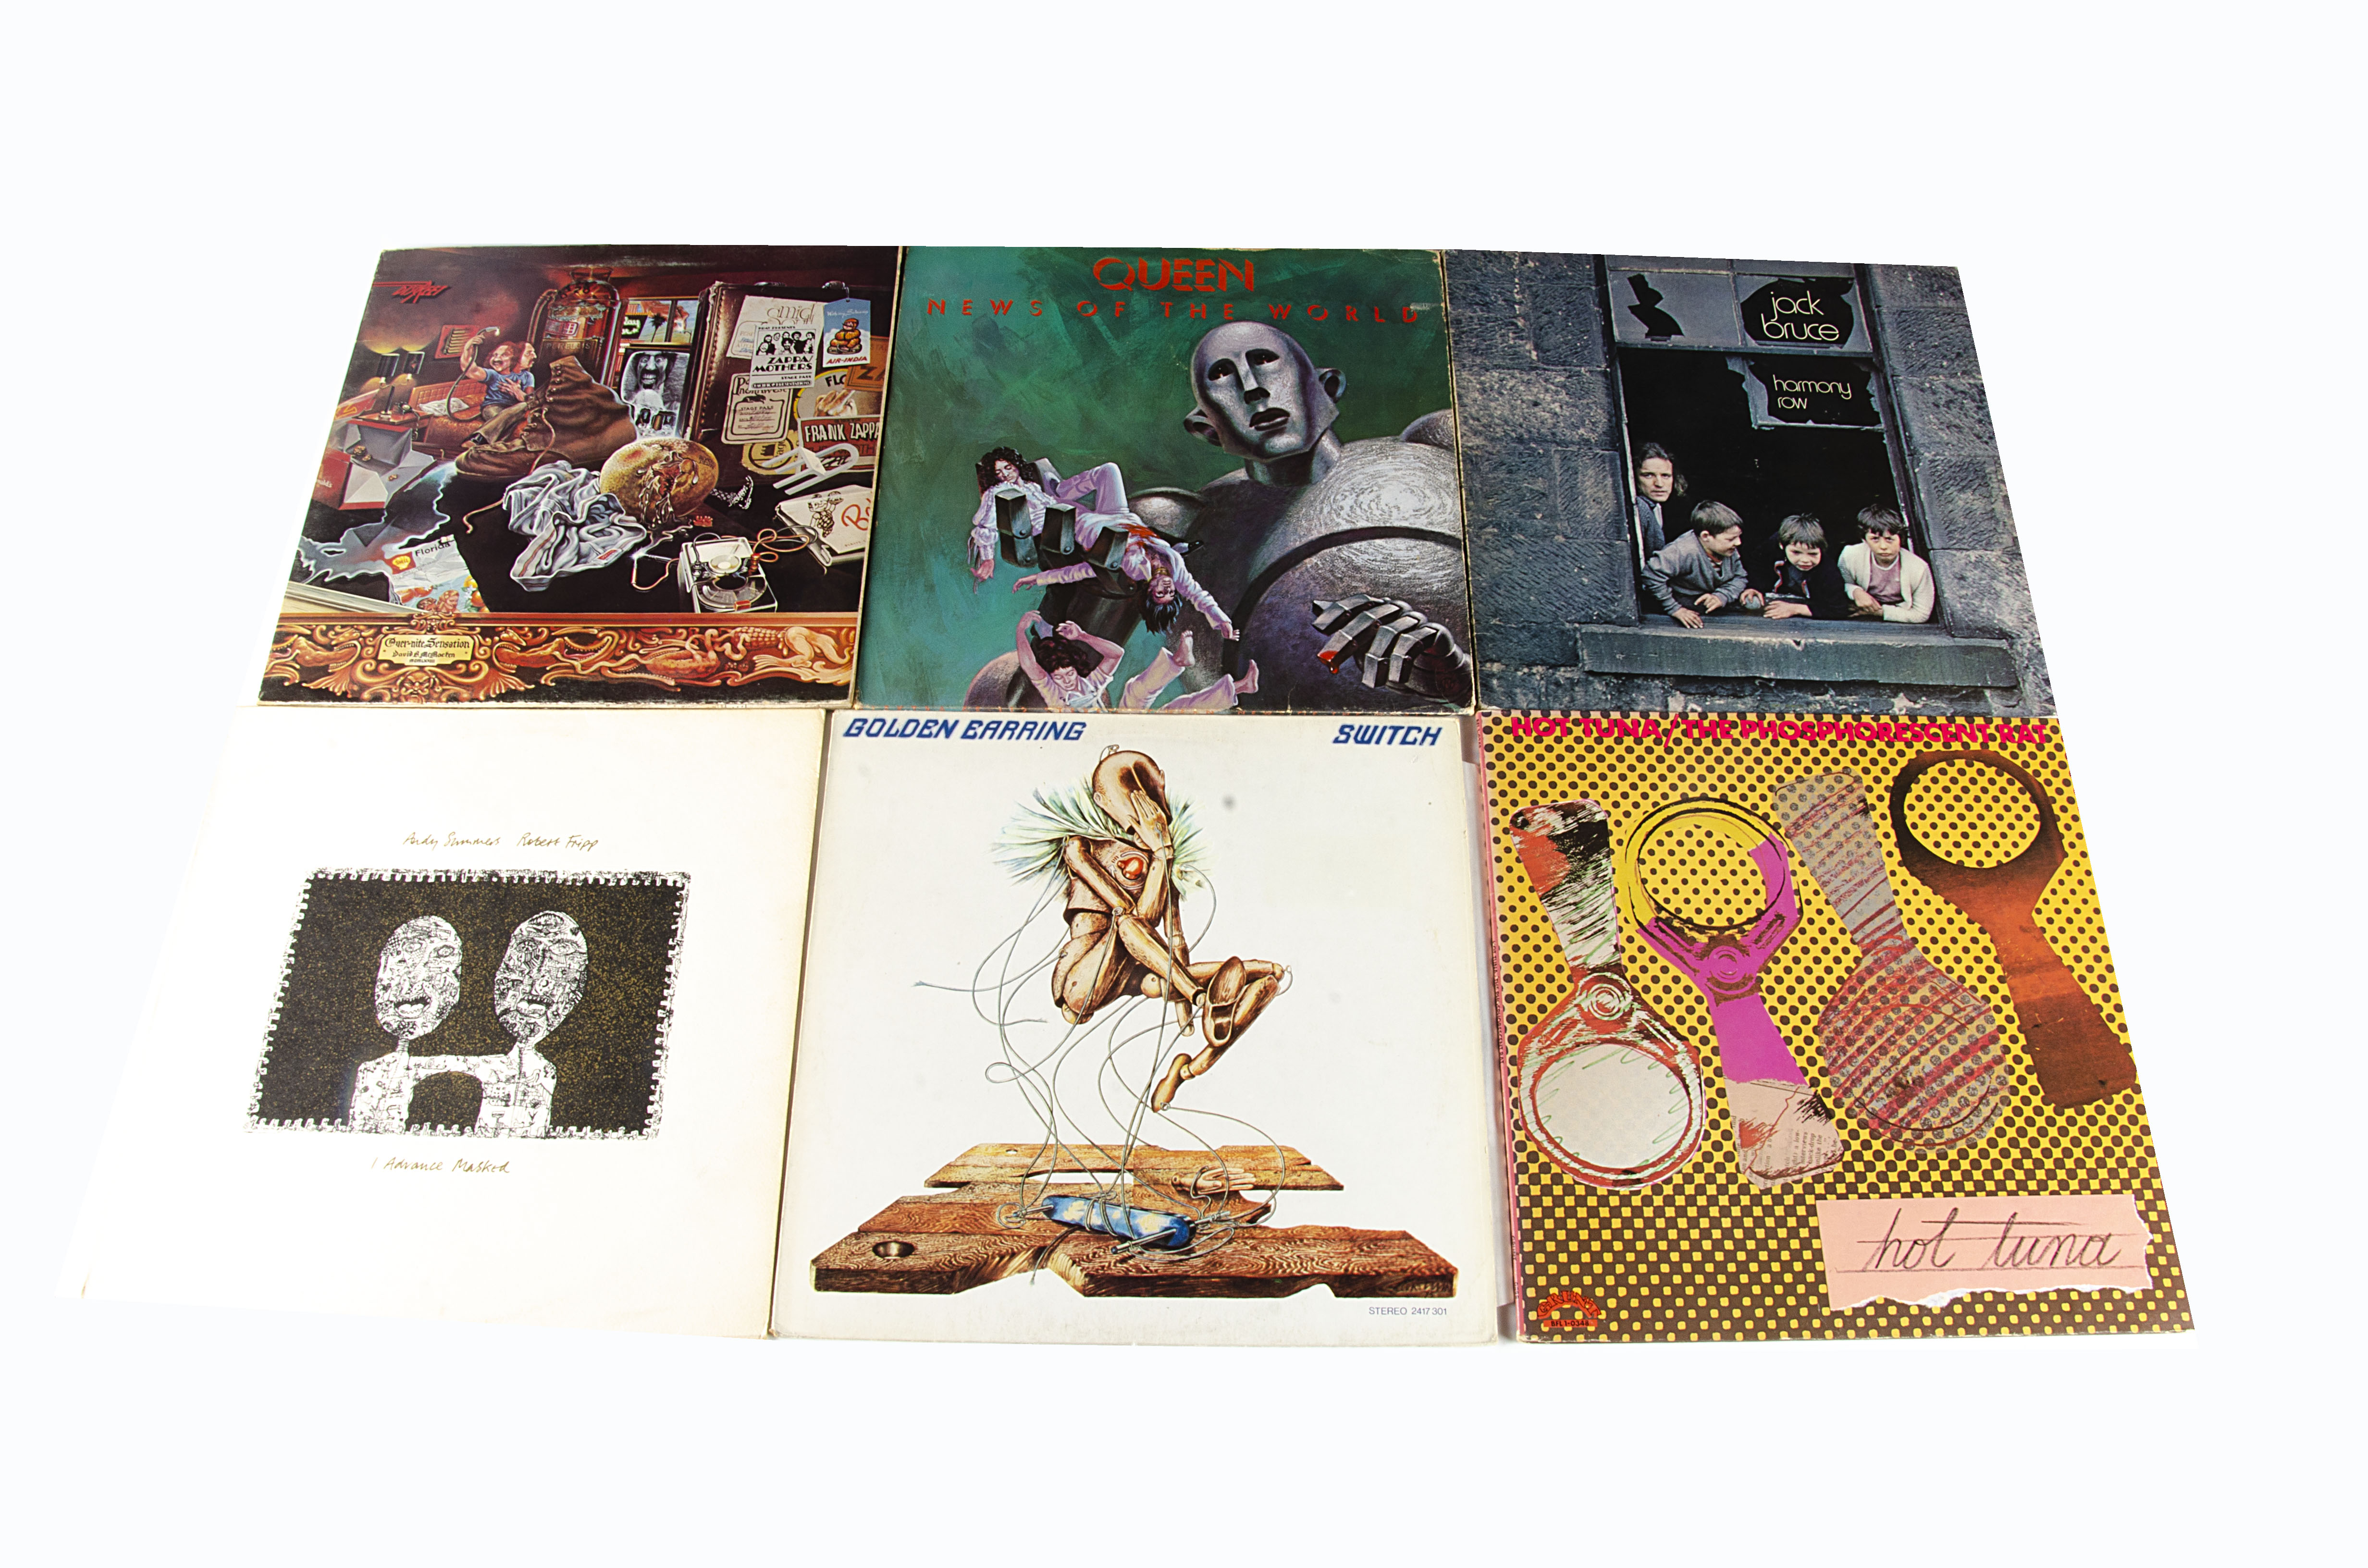 Rock / Prog LPs, approximately eighty albums of mainly Classic and Progressive Rock with artists